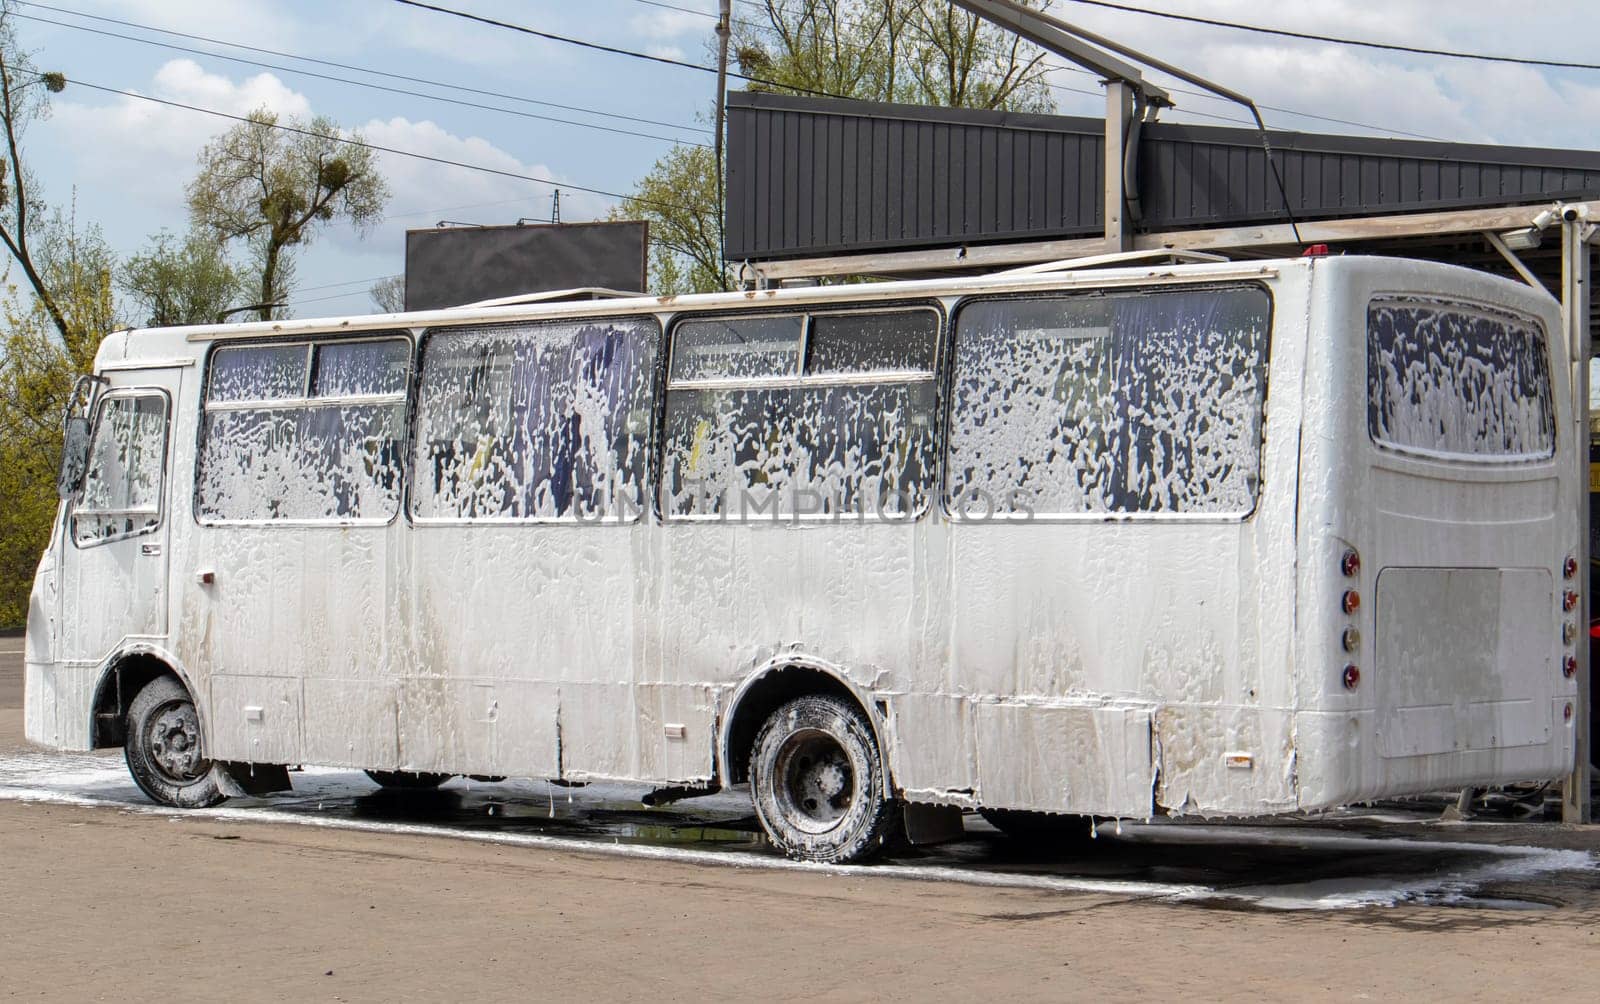 Big white bus in foam at a self-service car wash. External washing of public transport buses. Self-service manual high-pressure car wash in the open air